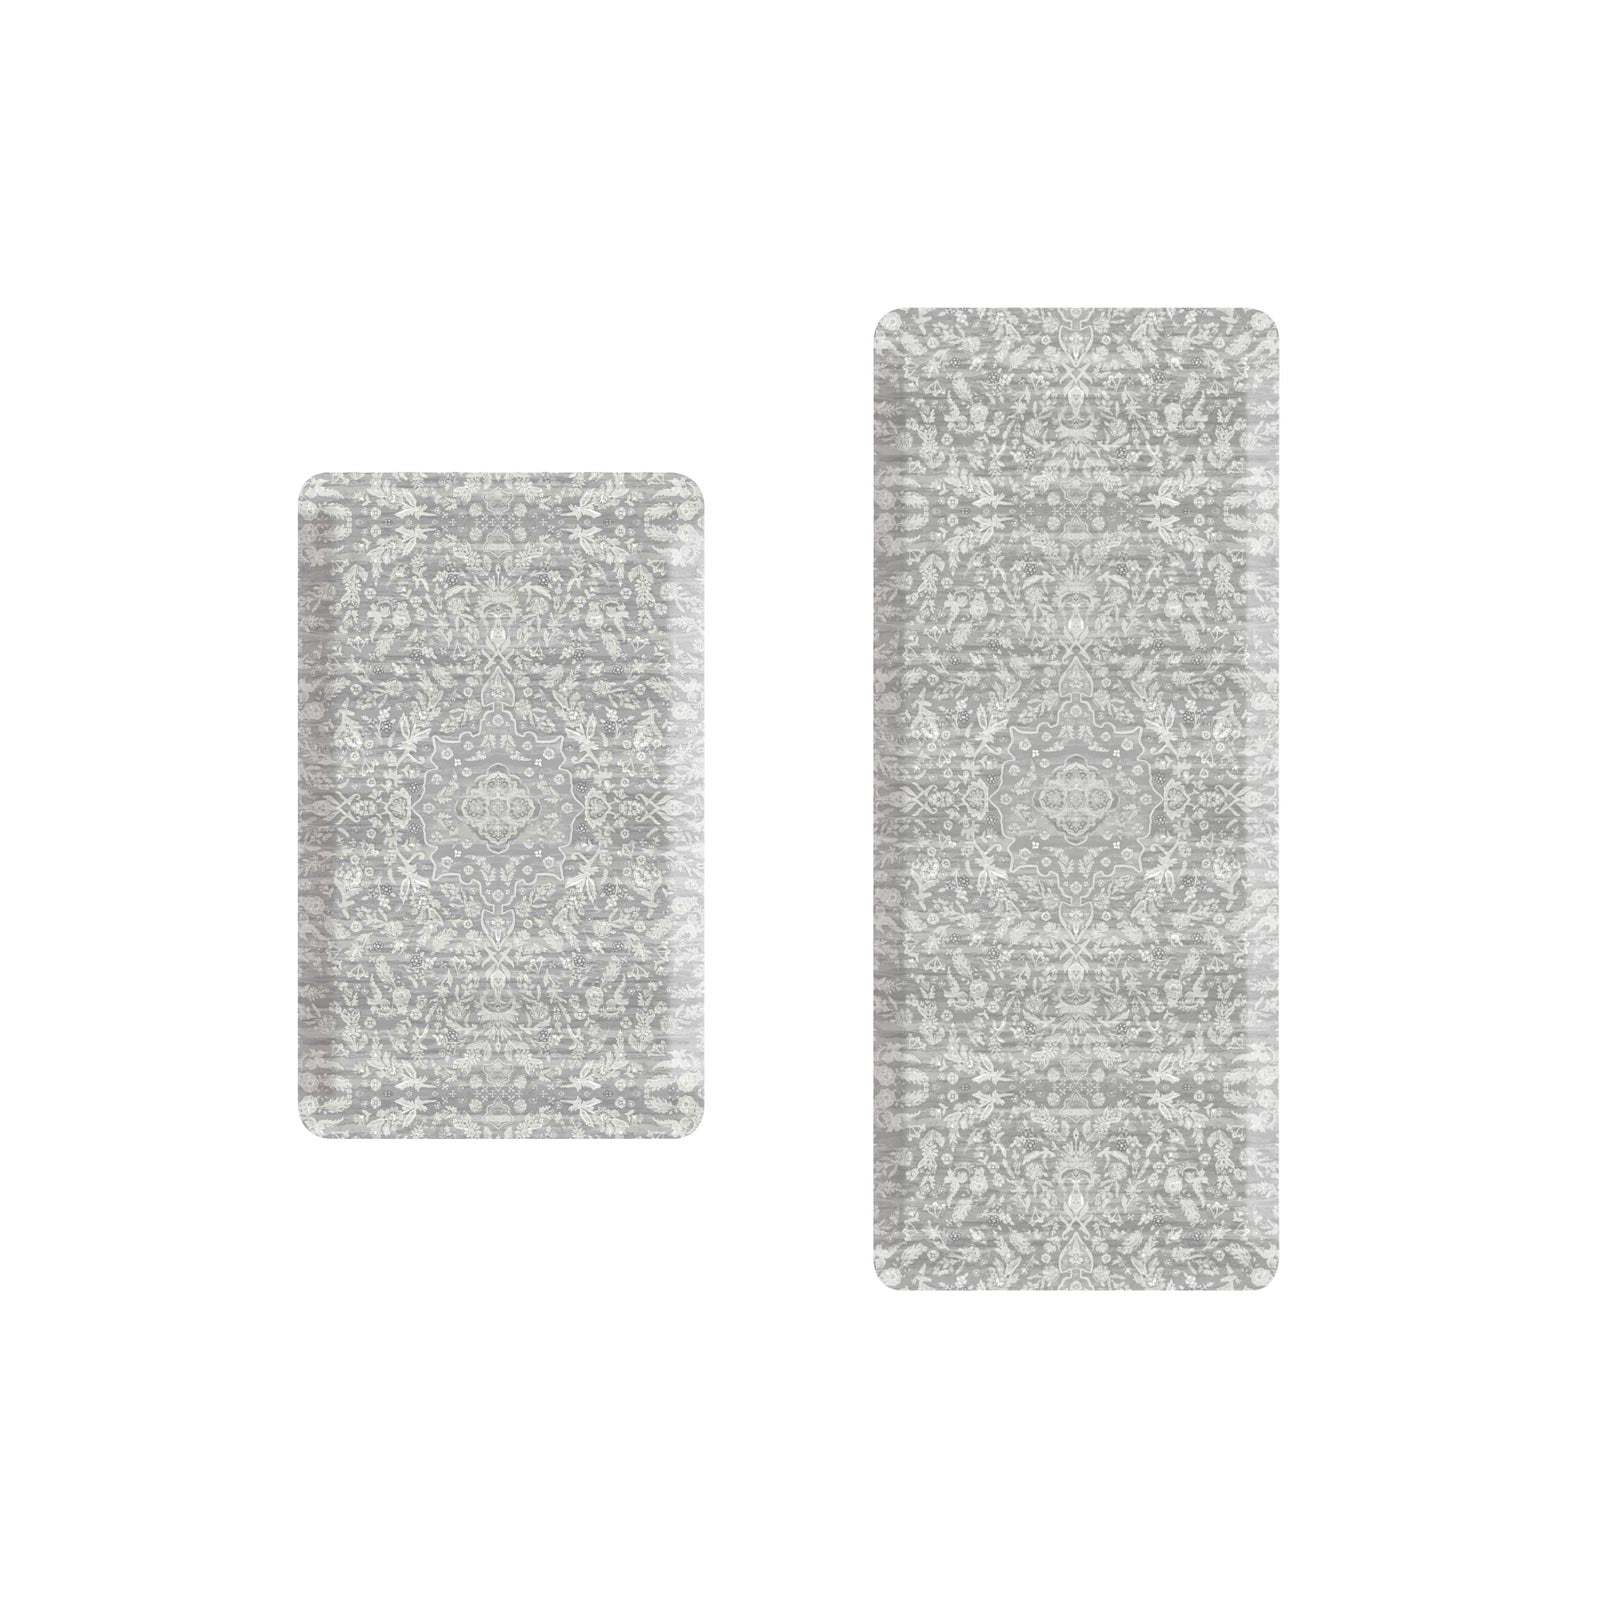 Emile earl grey gray and cream floral standing mat shown in sizes 22x36 and 22x54